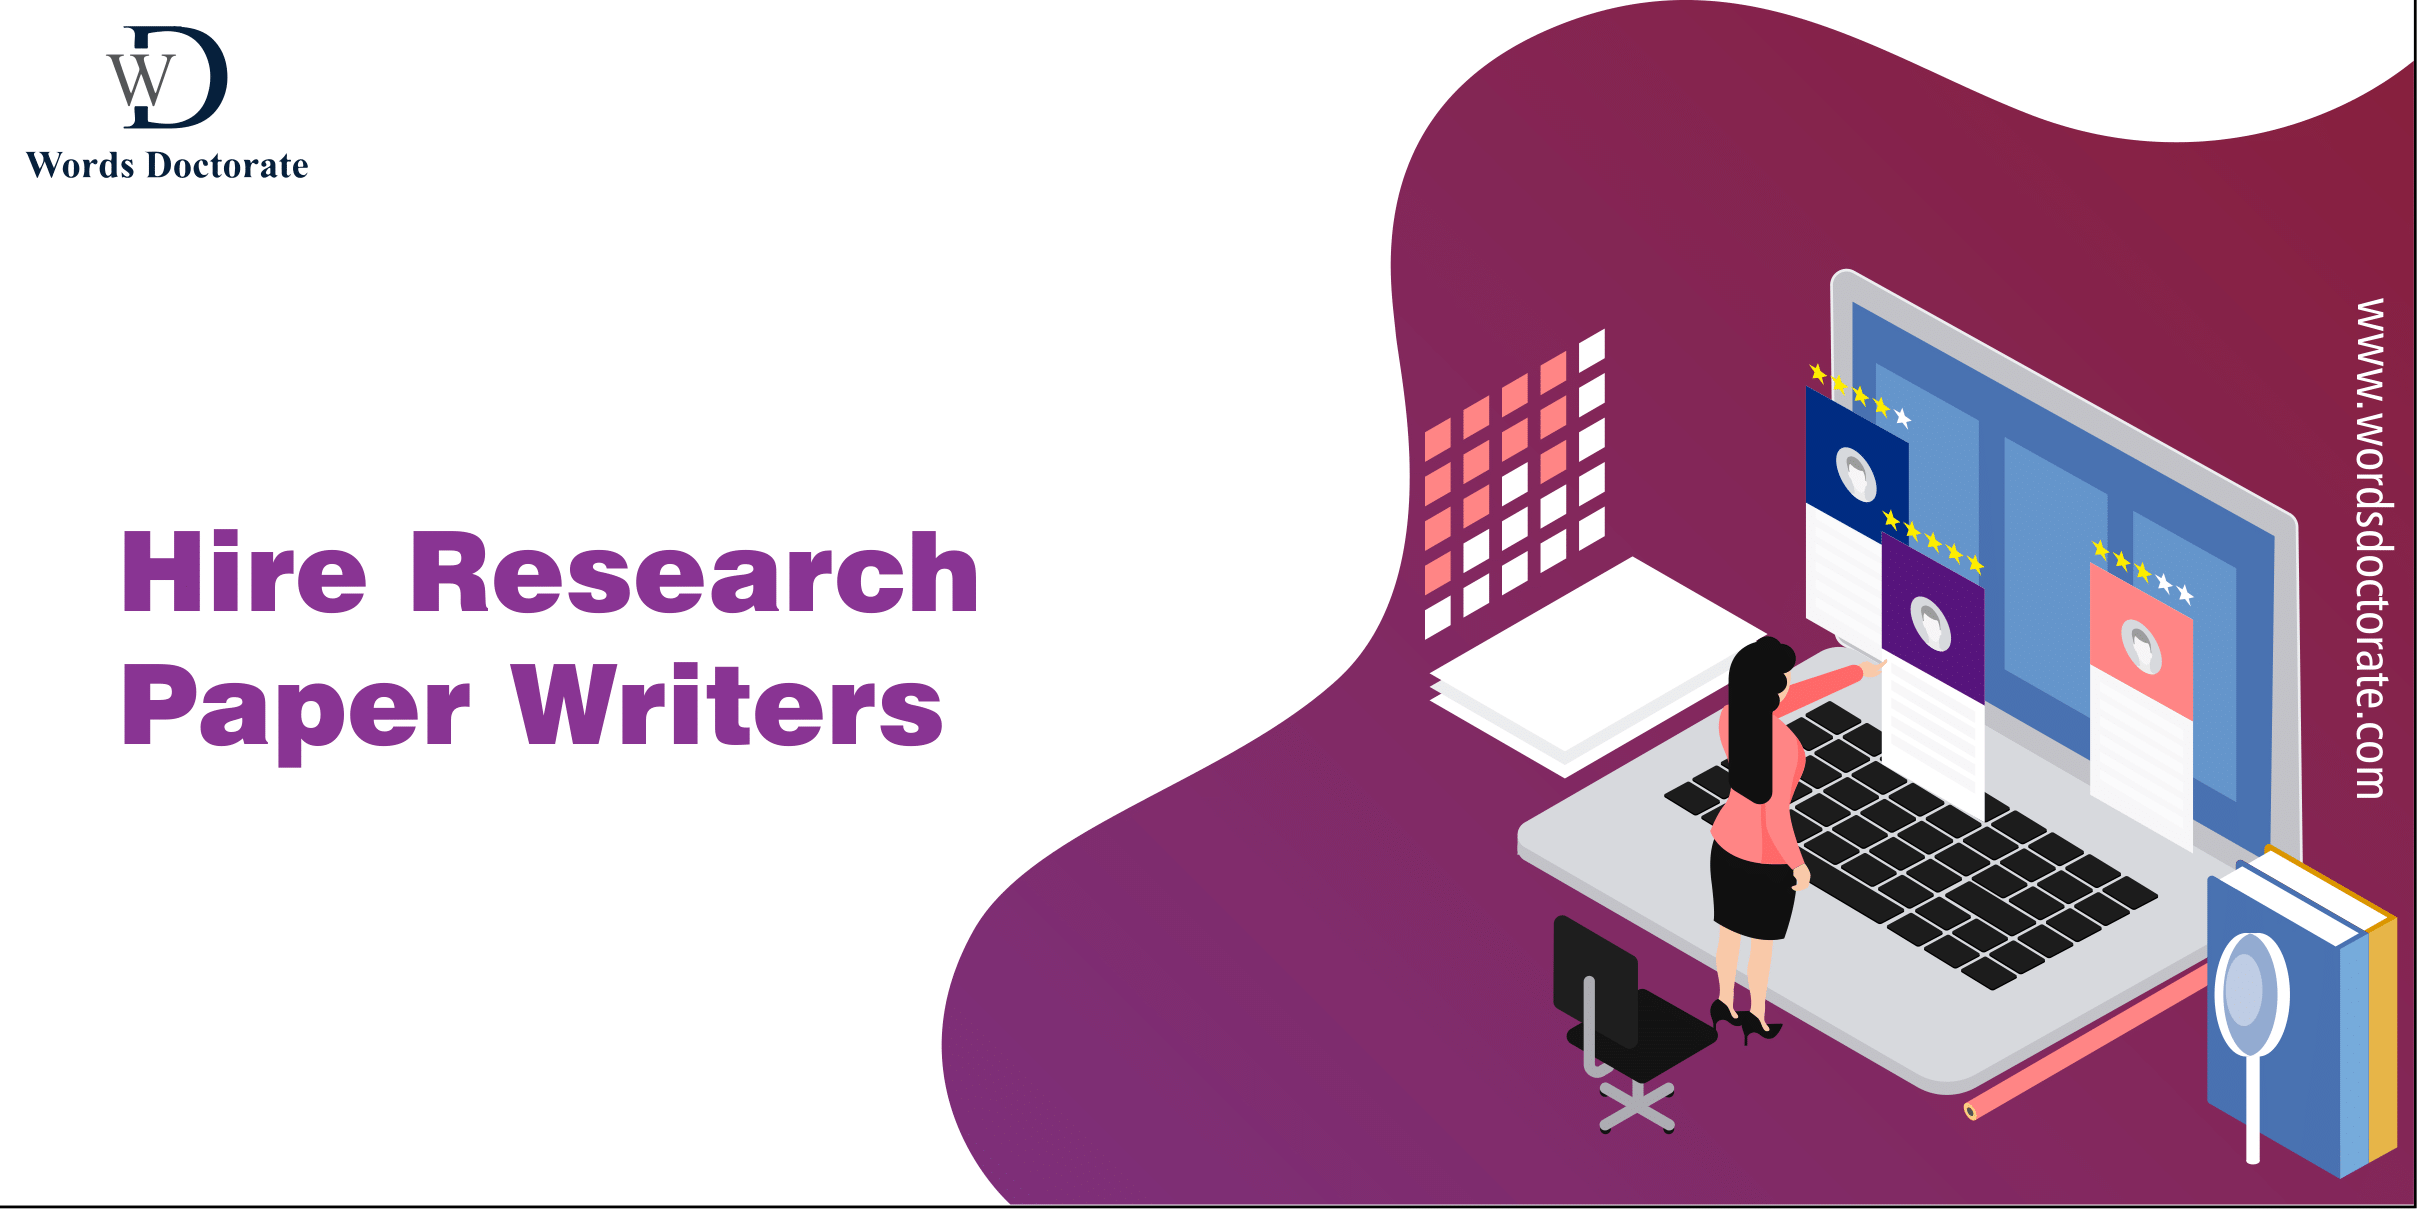 Hire Research Paper Writers